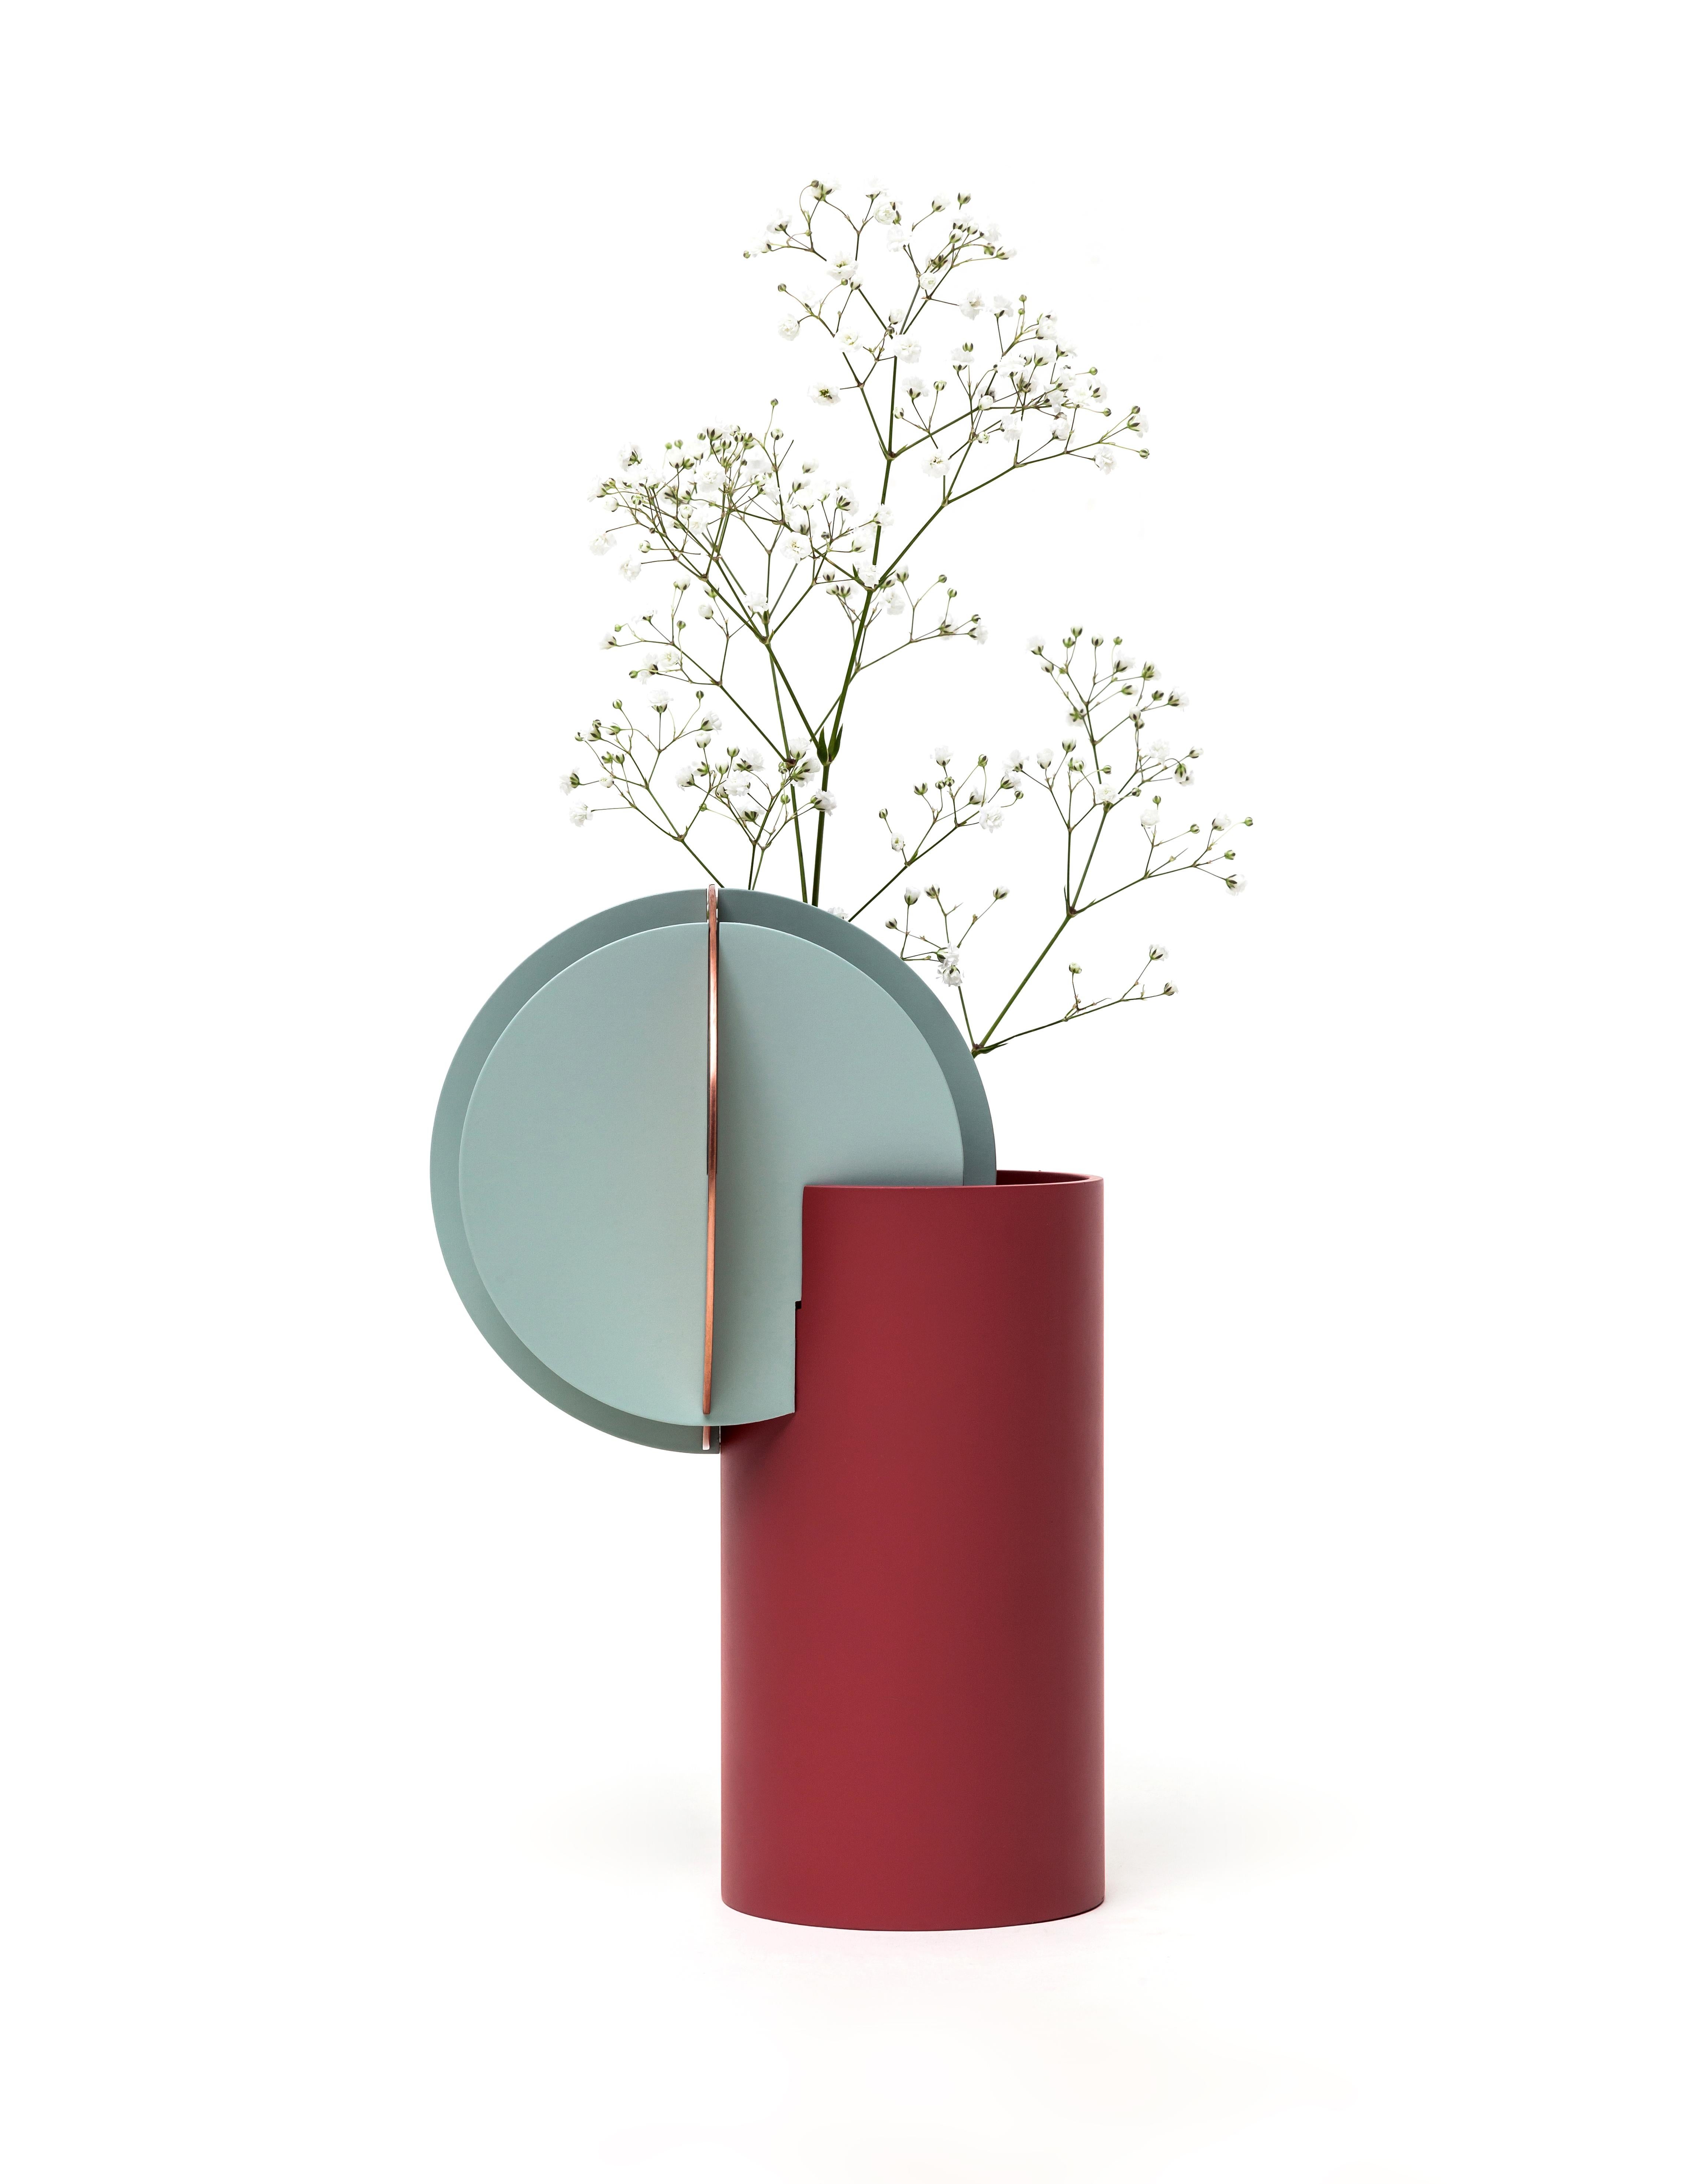 Delaunay vase CS1 by NOOM
Dimensions: 17.5 cm x 15 cm x H 26.5 cm
Materials: Copper, painted steel. Color scheme: terracotta red, blue, and cooper. 

NOOM is a young rapidly growing design company from Ukraine that produces lighting, decor, and